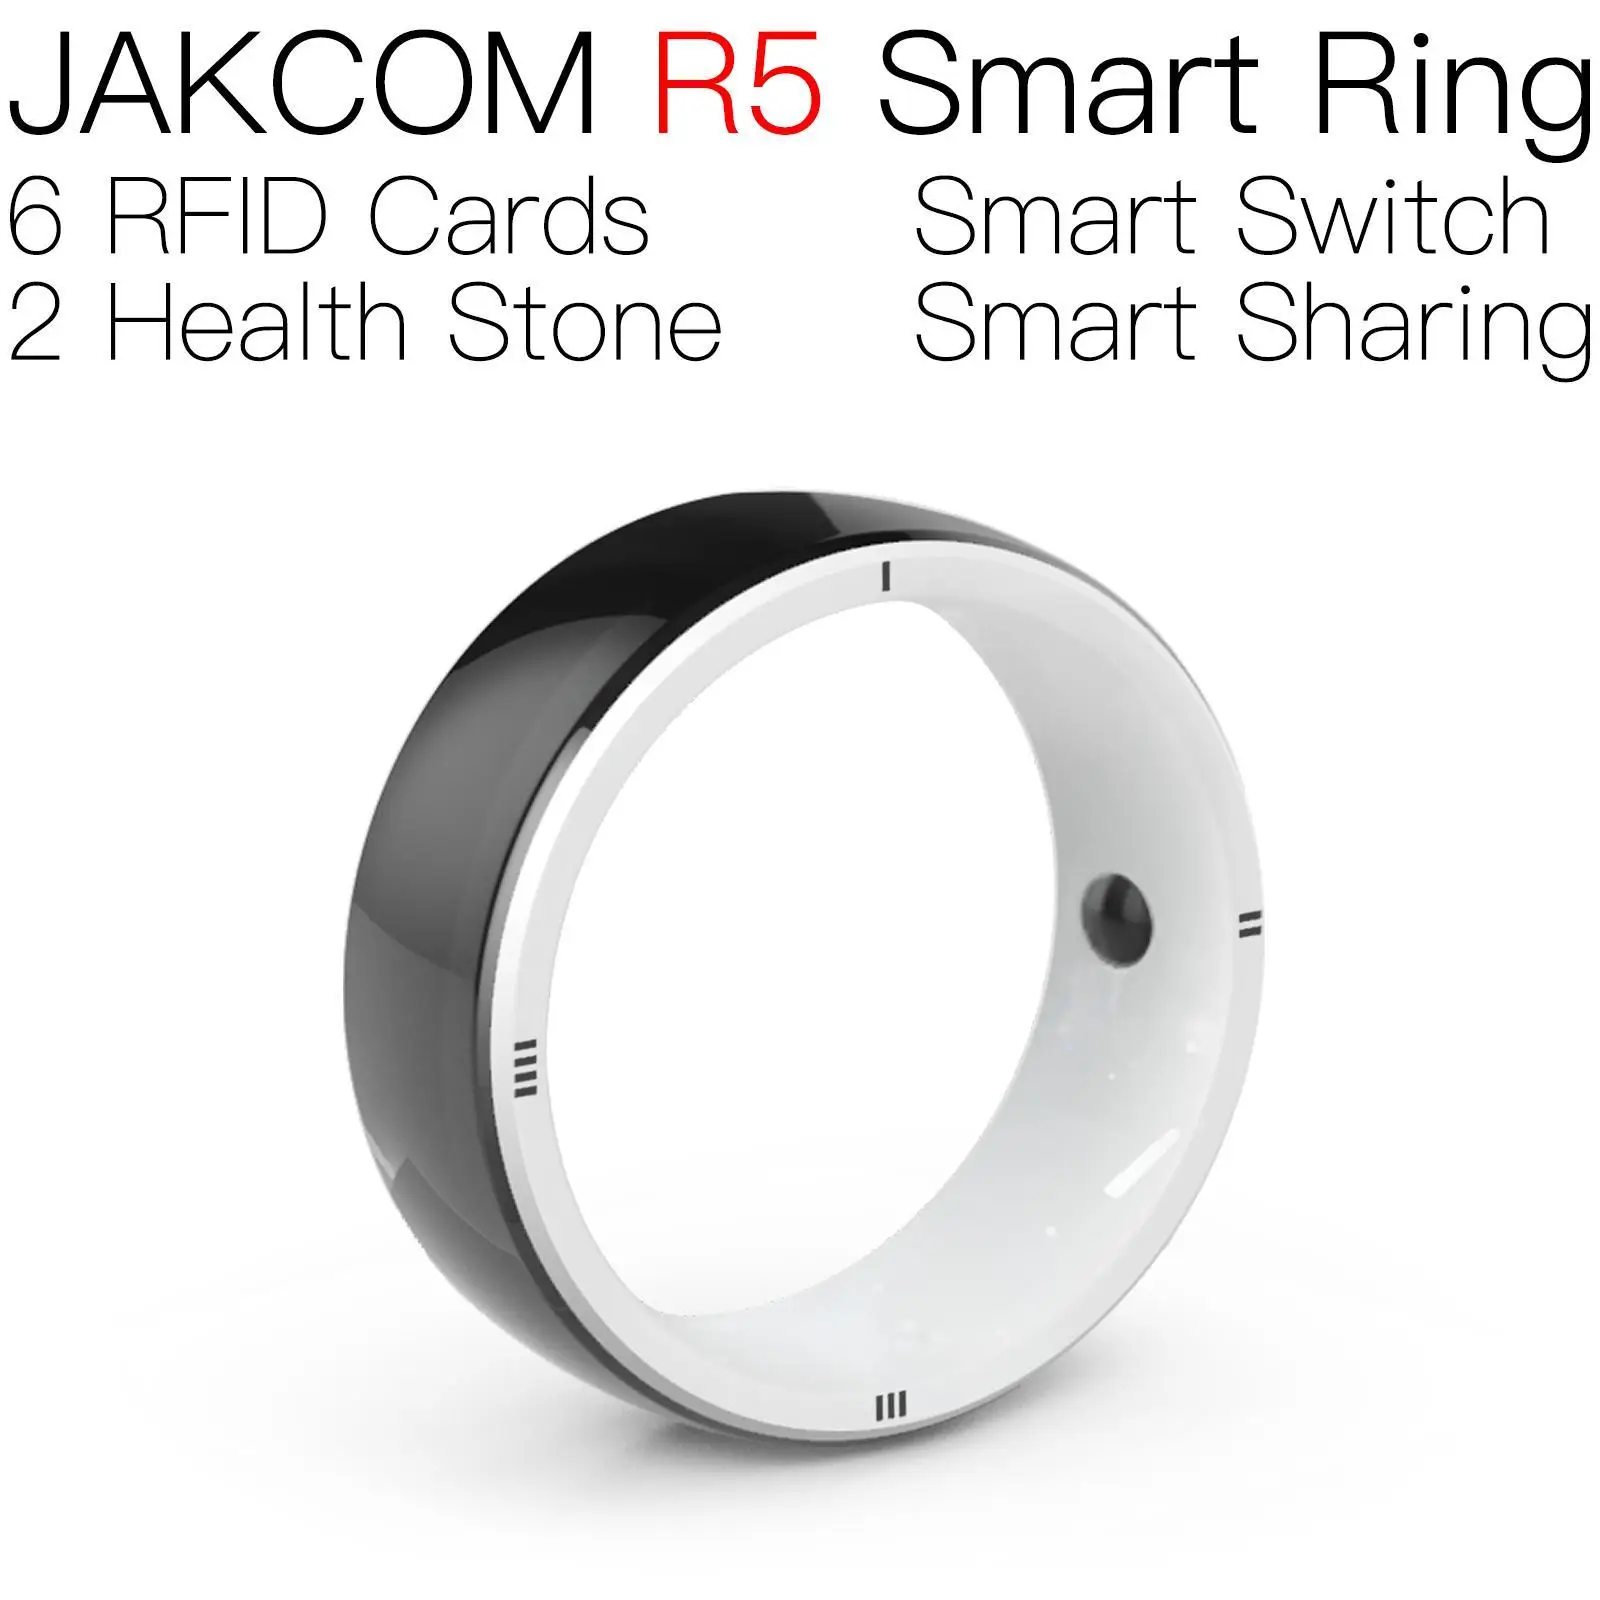 jakcom-r5-smart-ring-best-gift-with-gps-tracker-for-car-blood-pressure-measuring-device-chasing-f1-smartwatch-android-phones